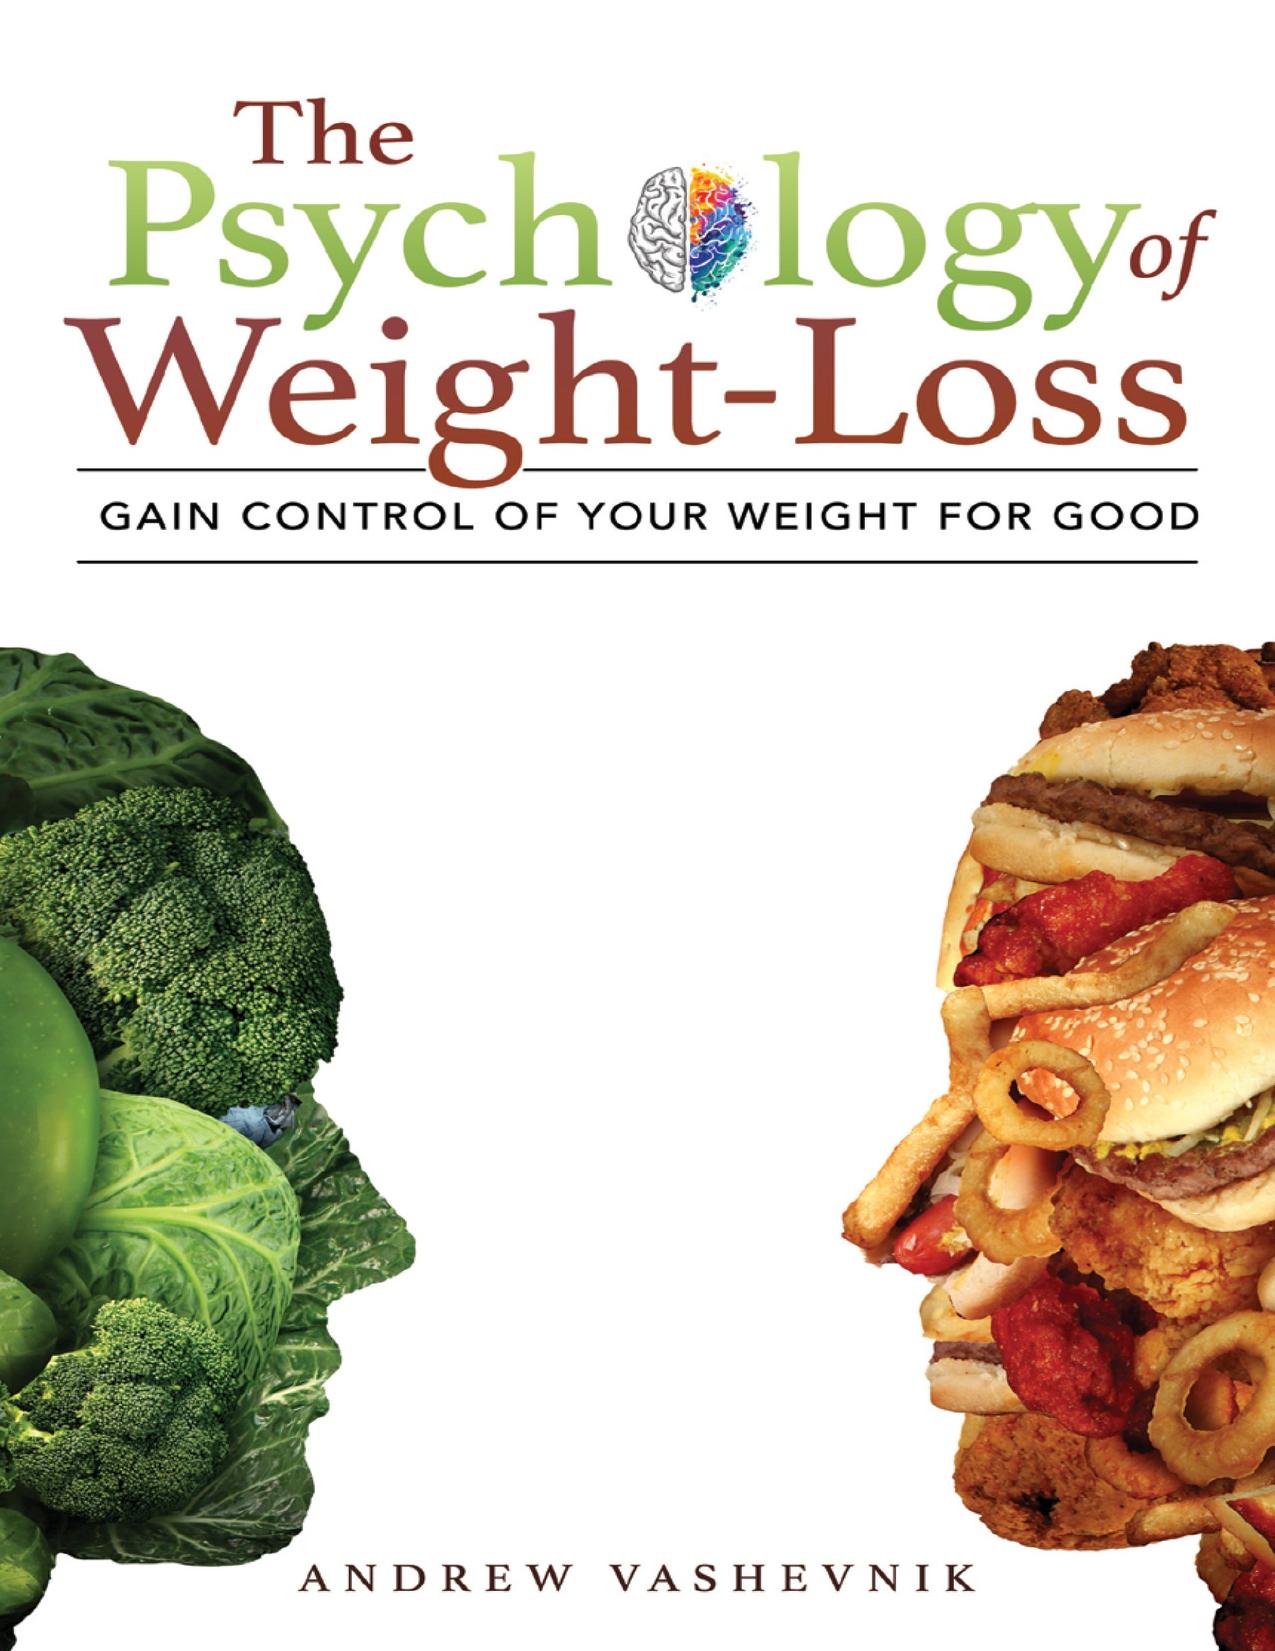 The Psychology Of Weight-Loss: Gain Control of Your Weight for Good by Andrew Vashevnik